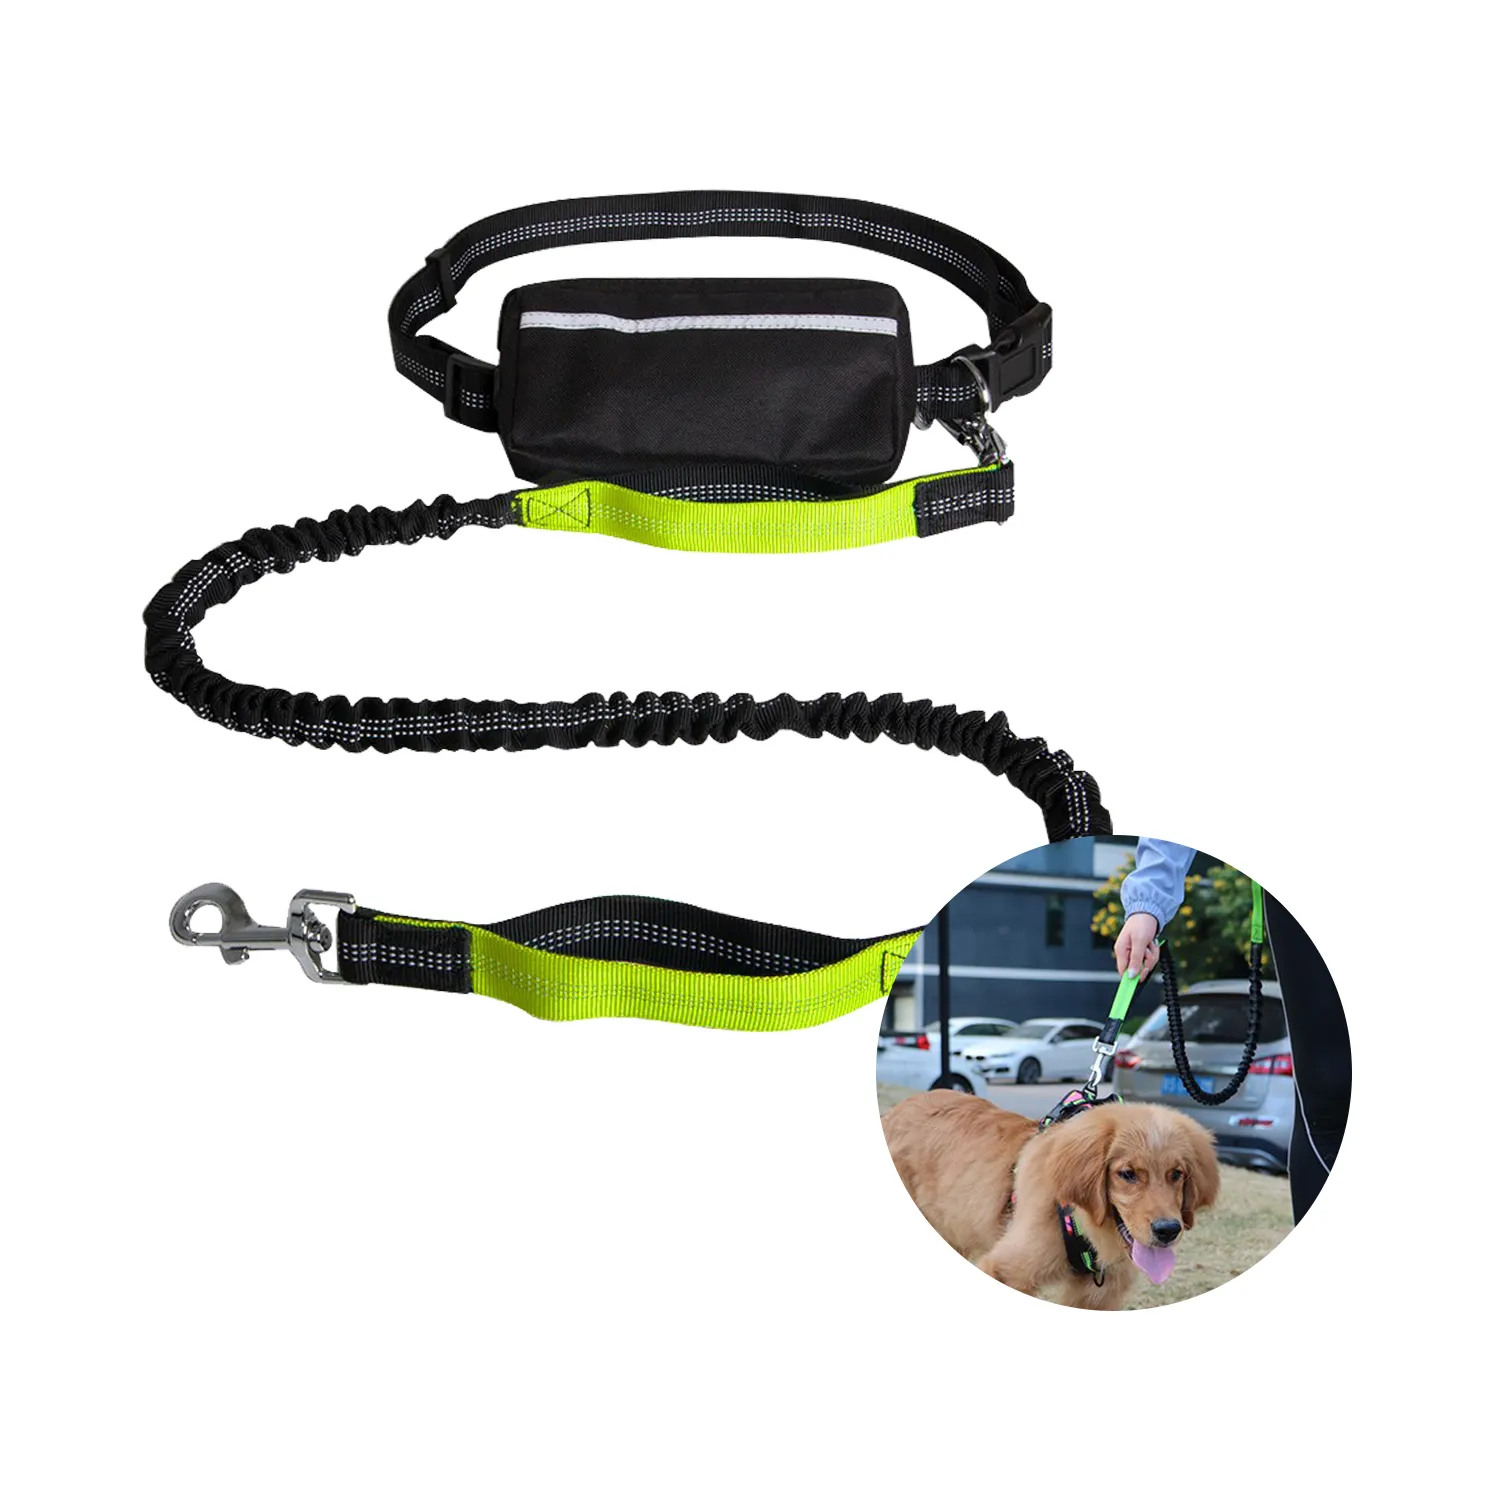 uxcell Dog Lead Harnesses Pet Leash Walking Adjustable Waist Belt Rope Traction Rope Reflective Straps and Belt Clip Puppy and Adult Dog Treats Tote Bags 